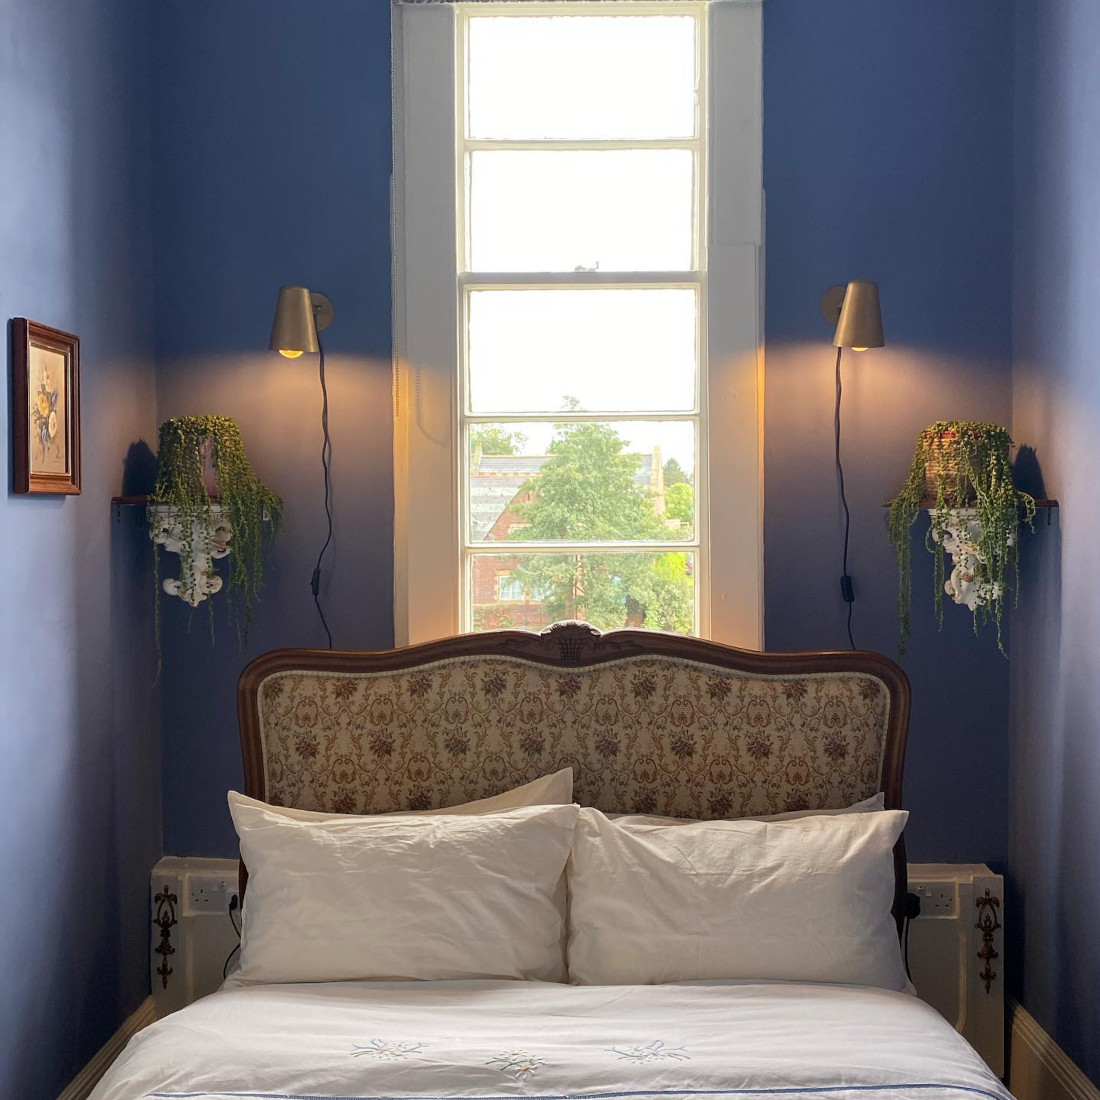 Blue bedroom interior paint Little Greene Pale Lupin